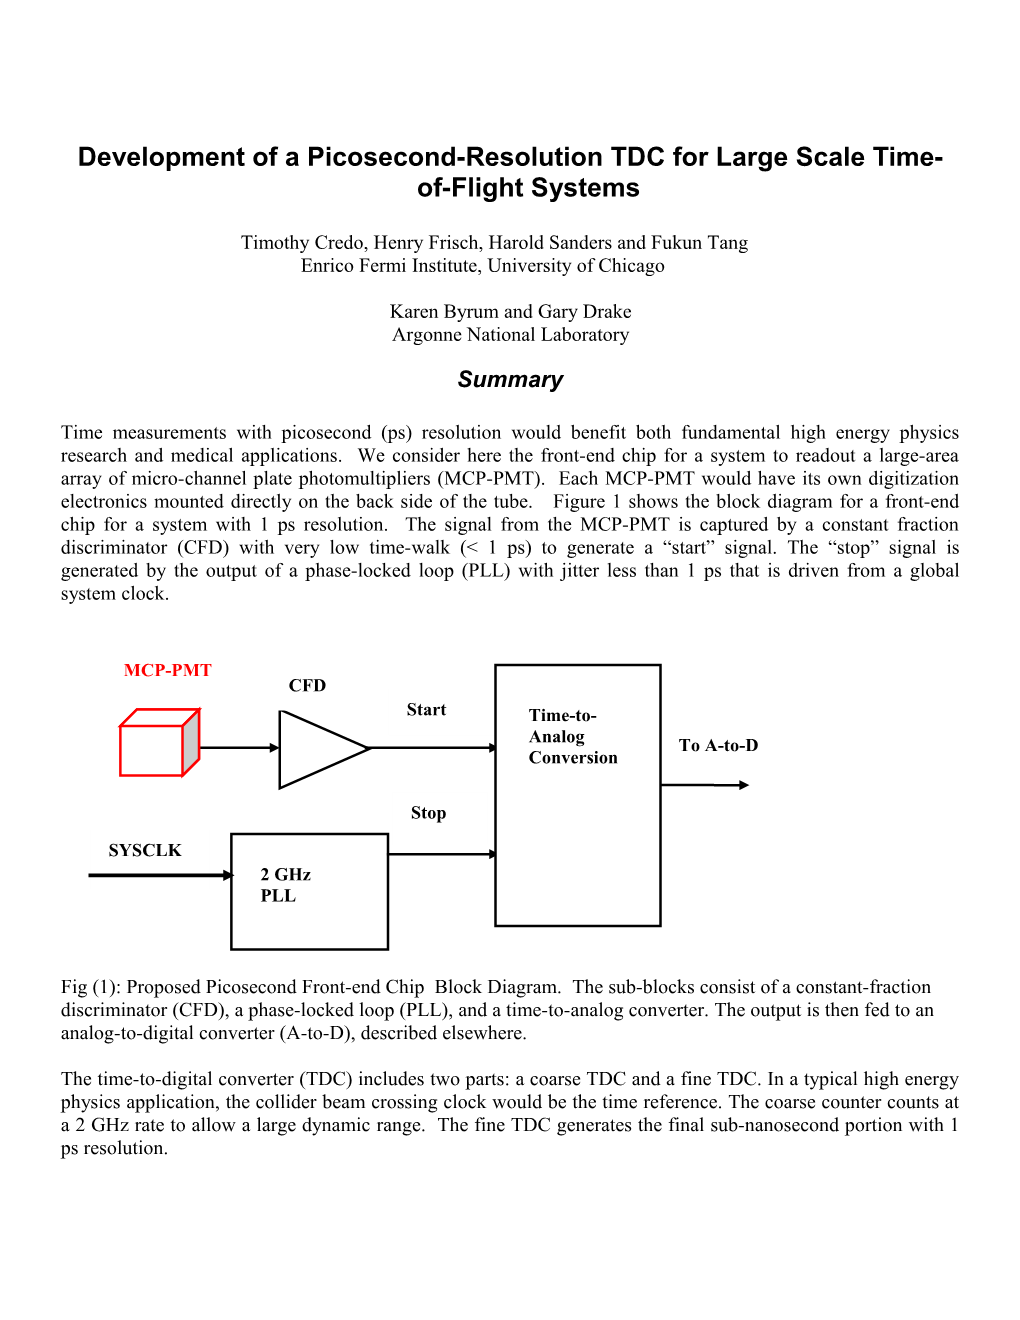 Development of Pico-Second Resolution Electronics for Large Scale Time-Of-Flight Systems